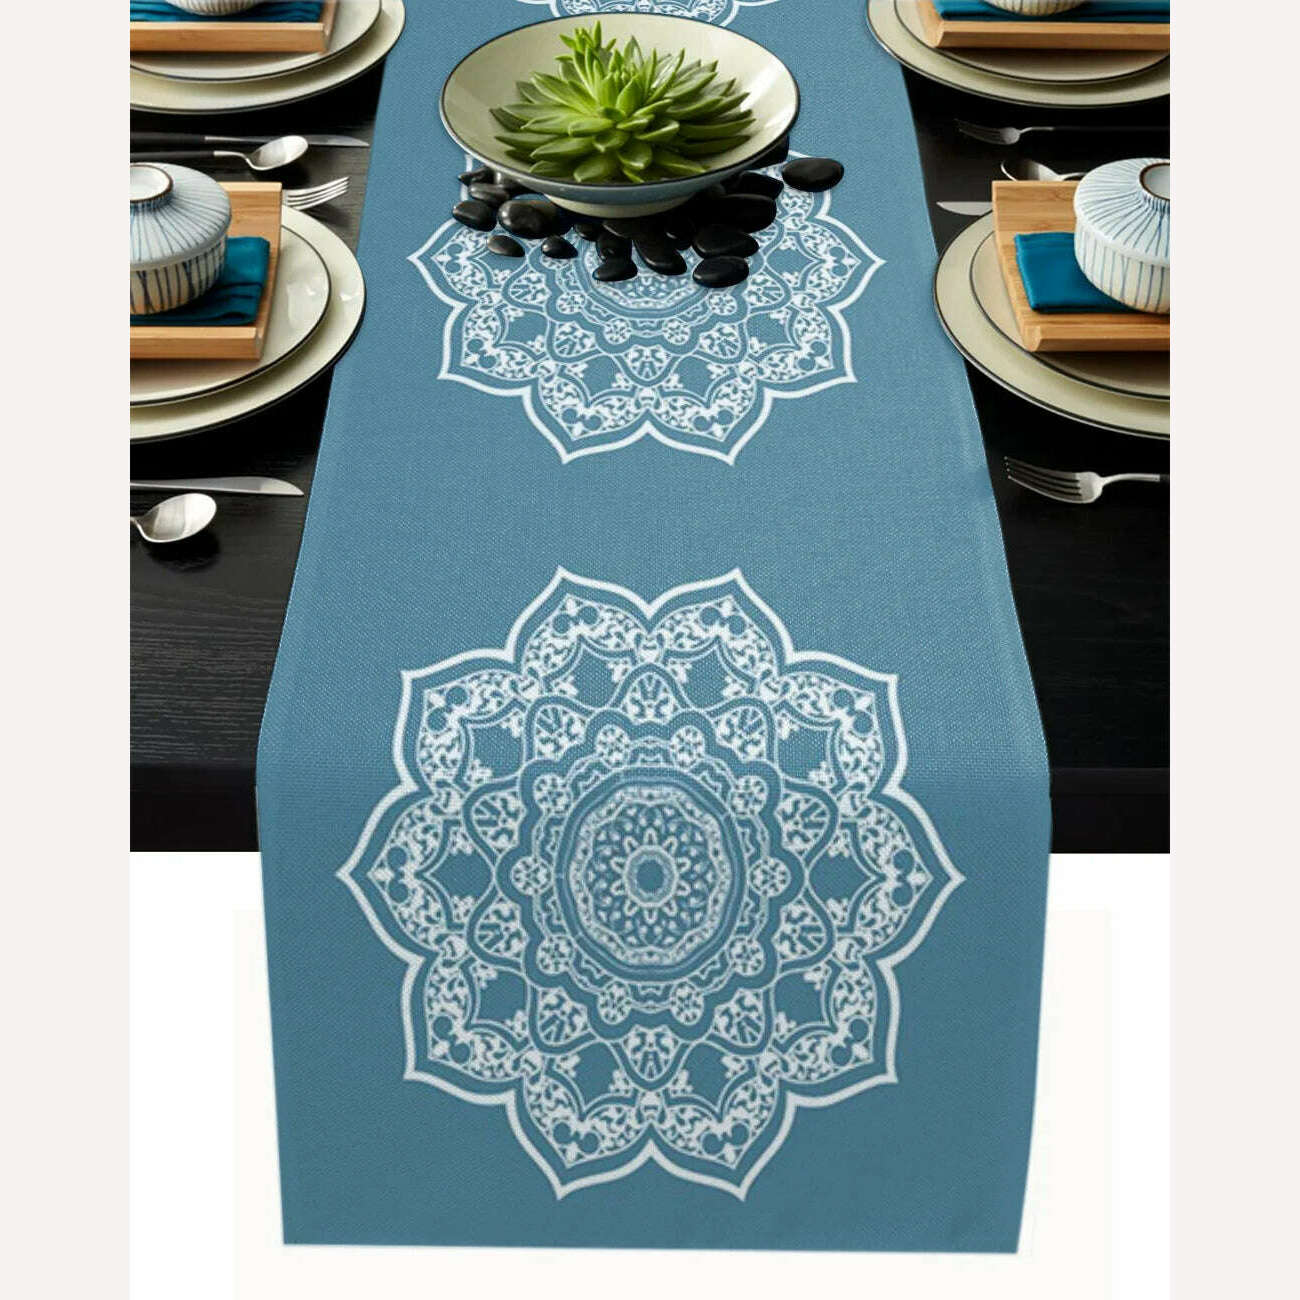 KIMLUD, Linen Burlap Table Runner Colorful Morocco Flowers Islam Arabesque Kitchen Table Runners Dinner Party Wedding Events Decor, LEX09181 / 180x33cm70x13inch, KIMLUD Womens Clothes